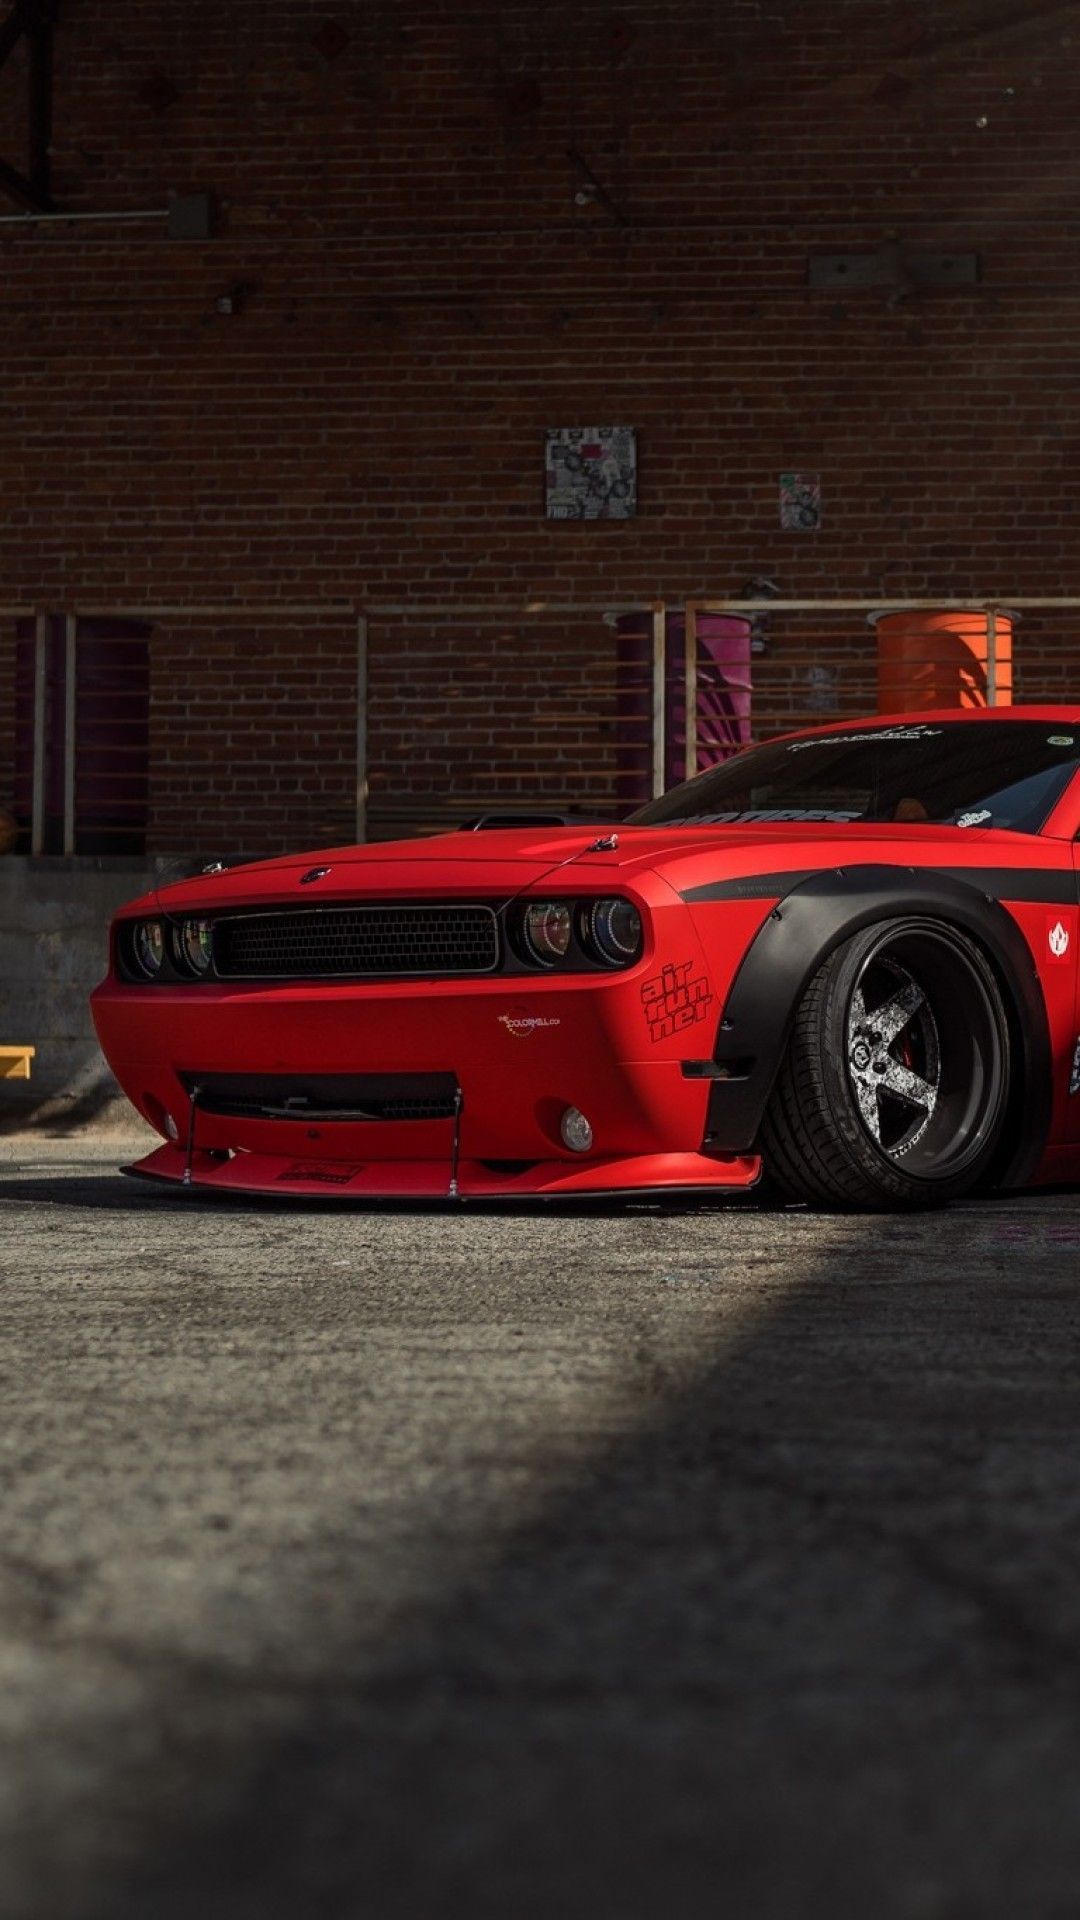 Dodge Challenger Tuned Mobile Wallpaper iPhone, Android, Samsung